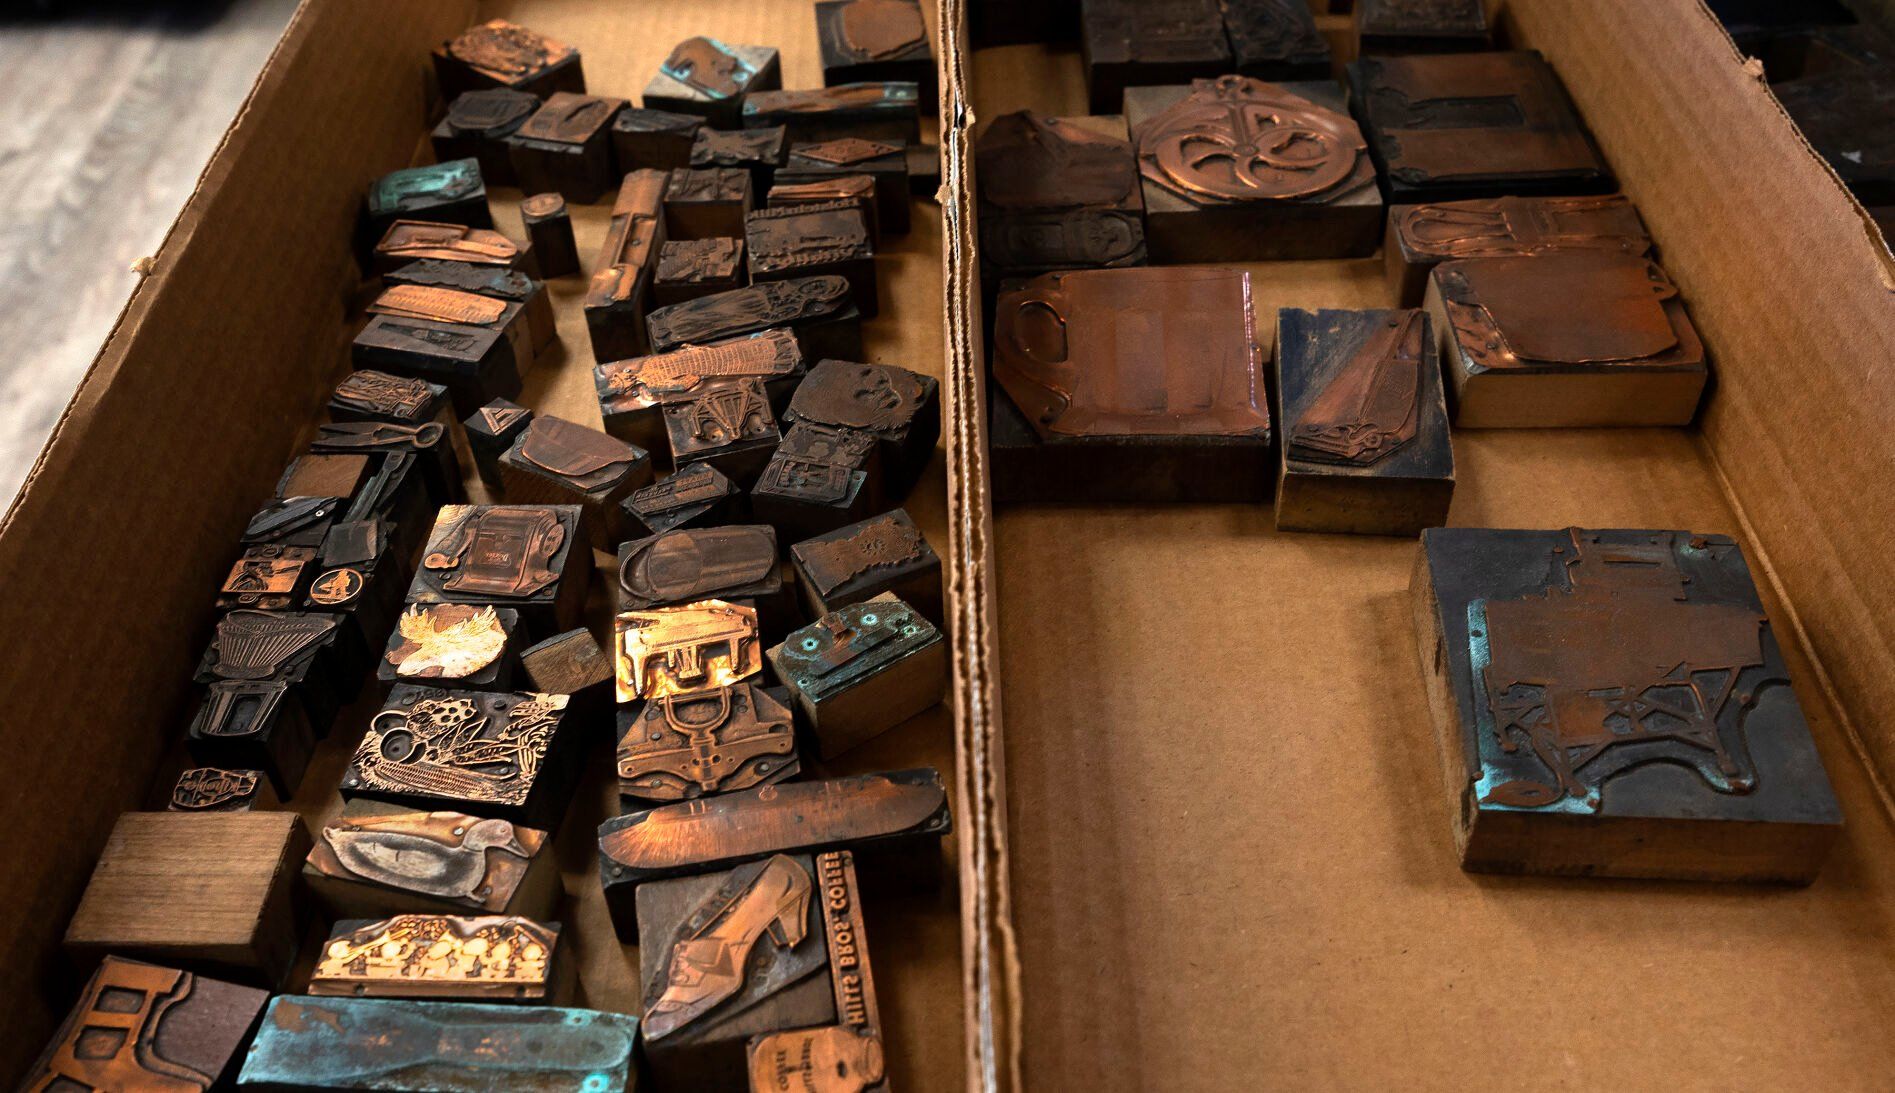 Antique printing blocks are among the items for sale at Josiah